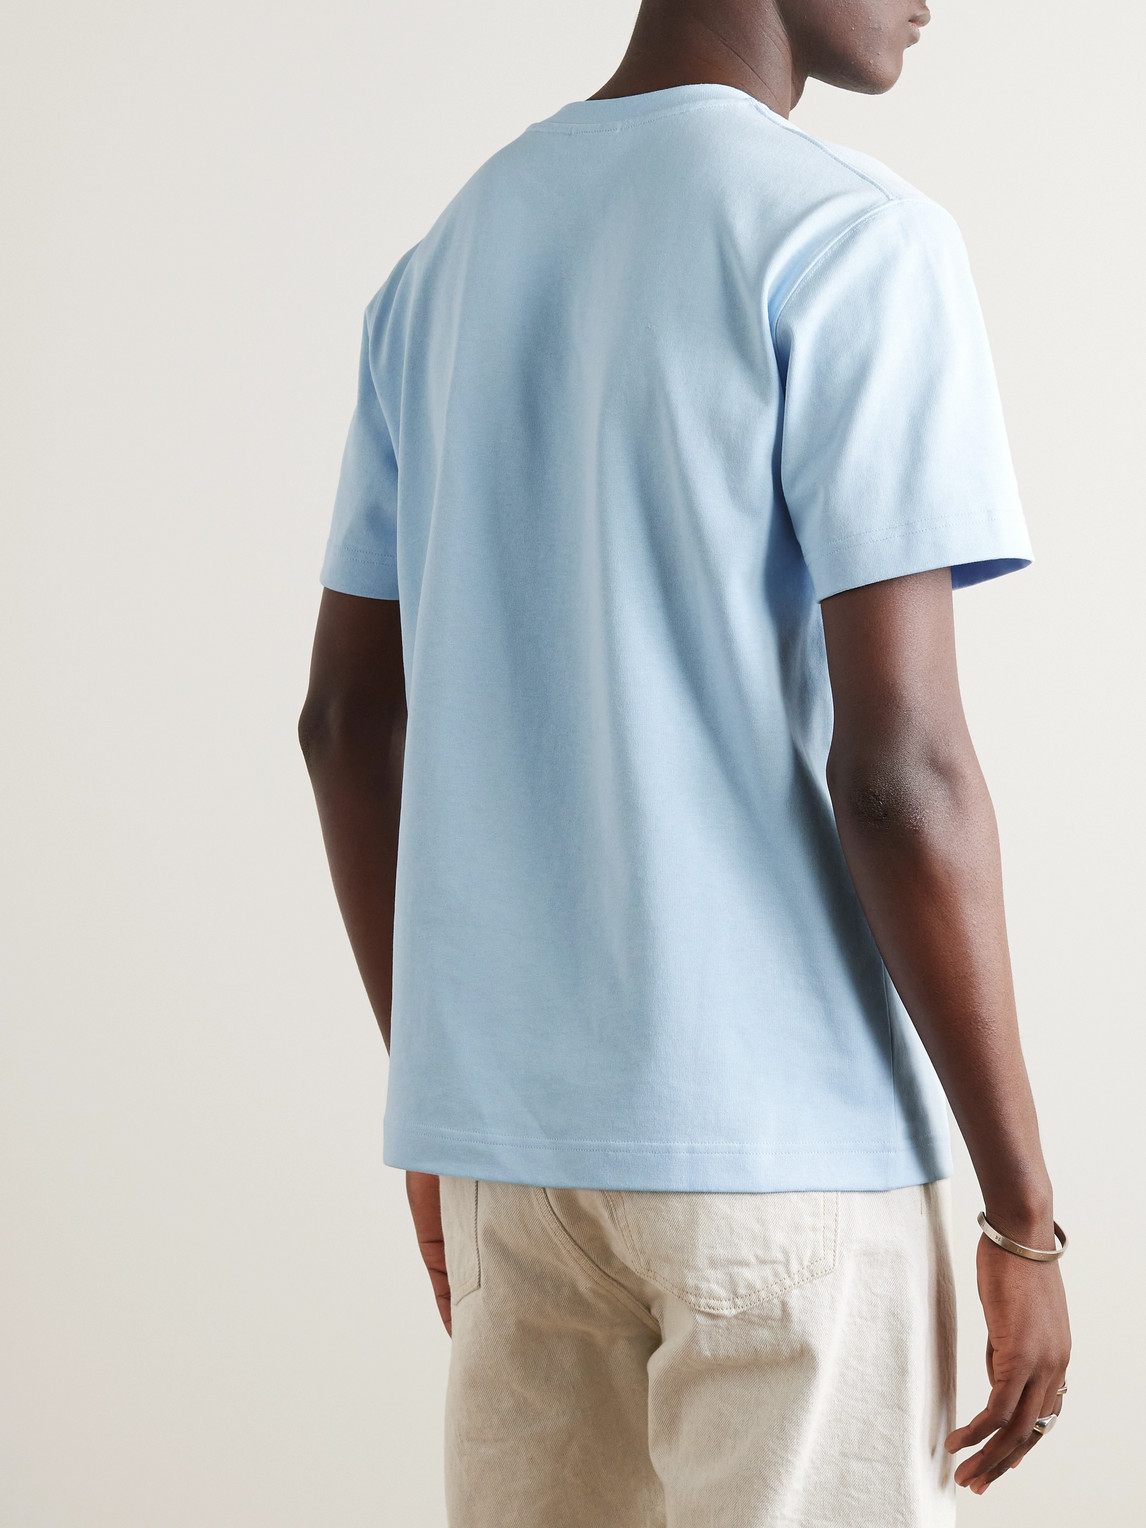 Shop Jacquemus Grosgrain-trimmed Logo-embroidered Cotton-jersey T-shirt In Blue